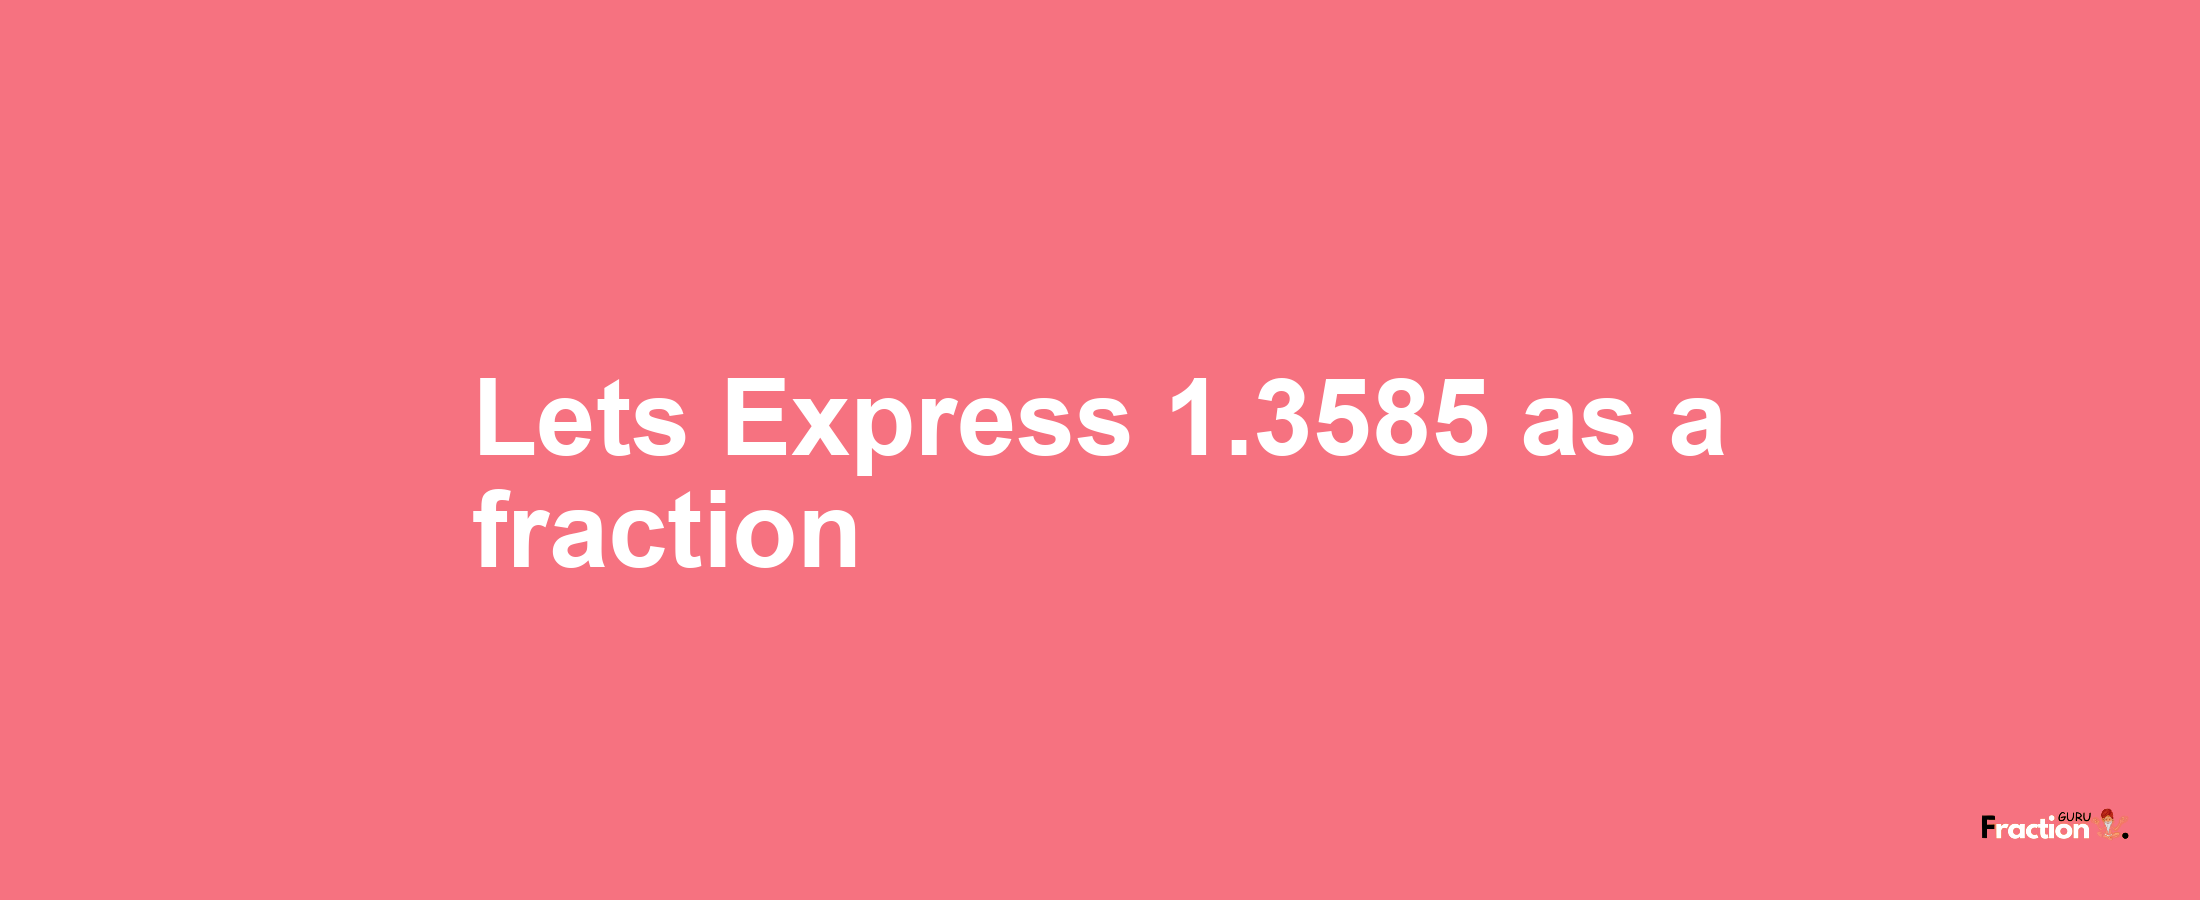 Lets Express 1.3585 as afraction